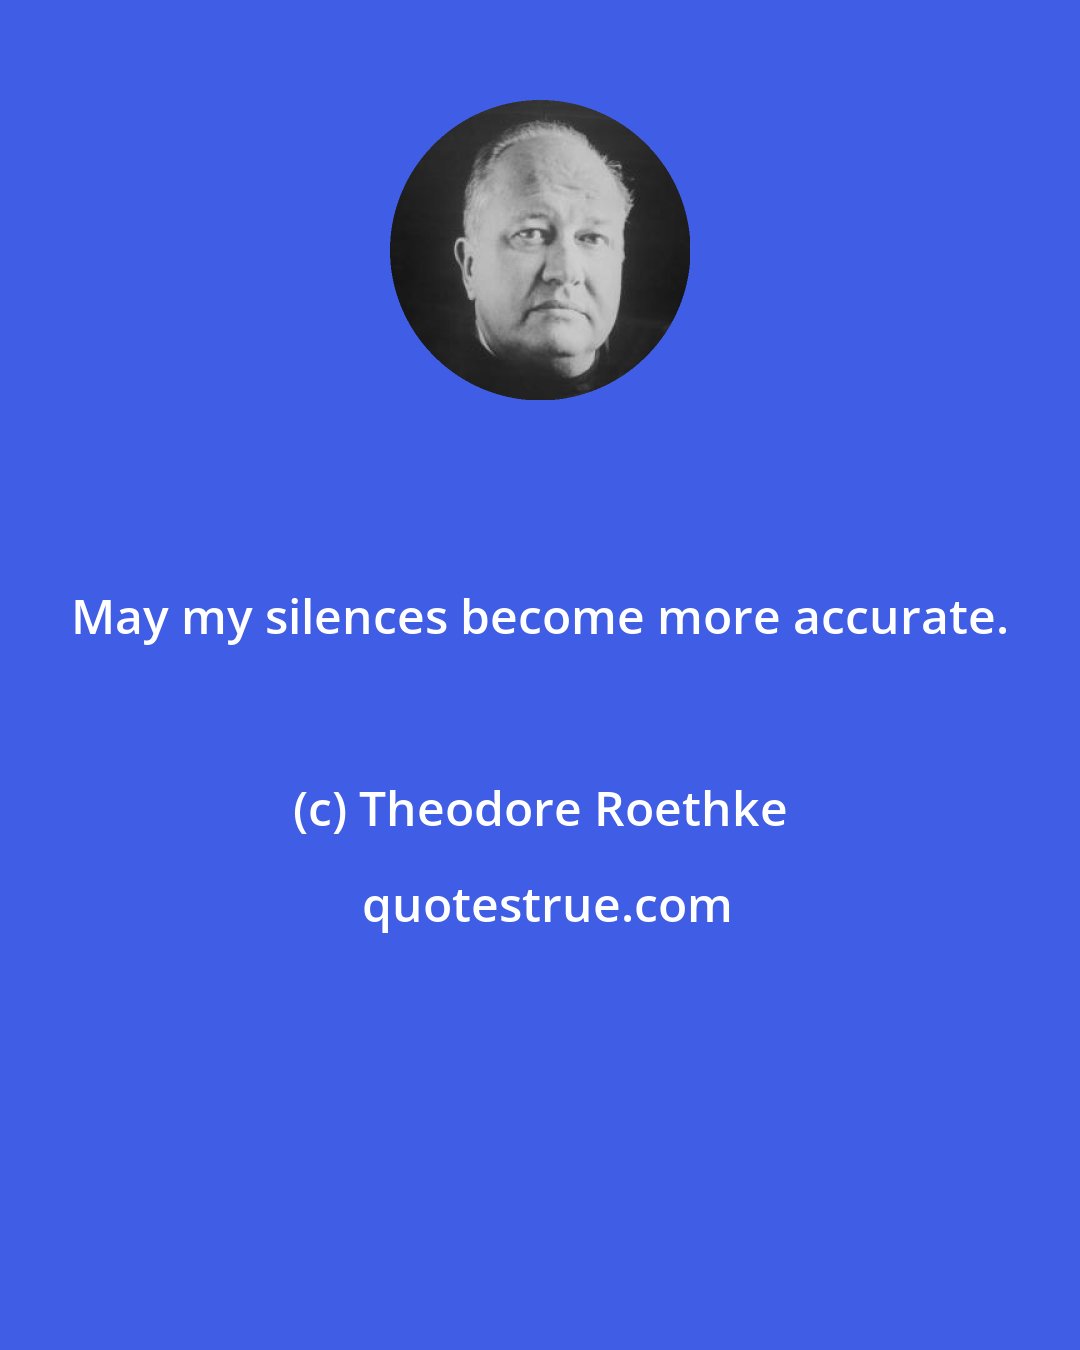 Theodore Roethke: May my silences become more accurate.